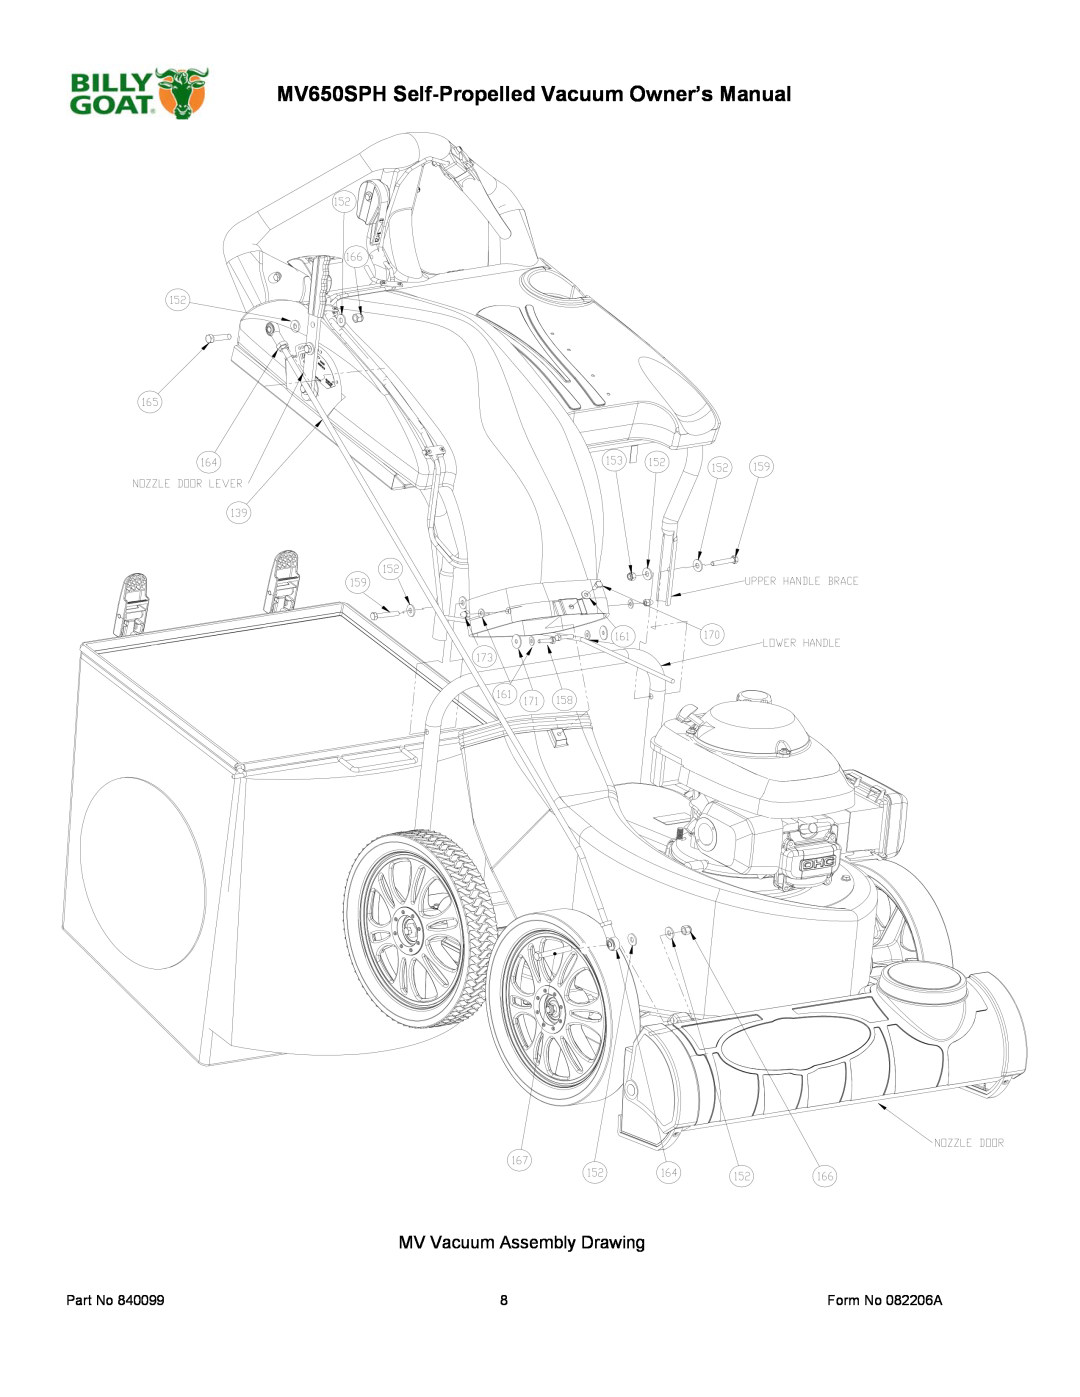 Billy Goat owner manual MV650SPH Self-Propelled Vacuum Owner’s Manual, MV Vacuum Assembly Drawing 